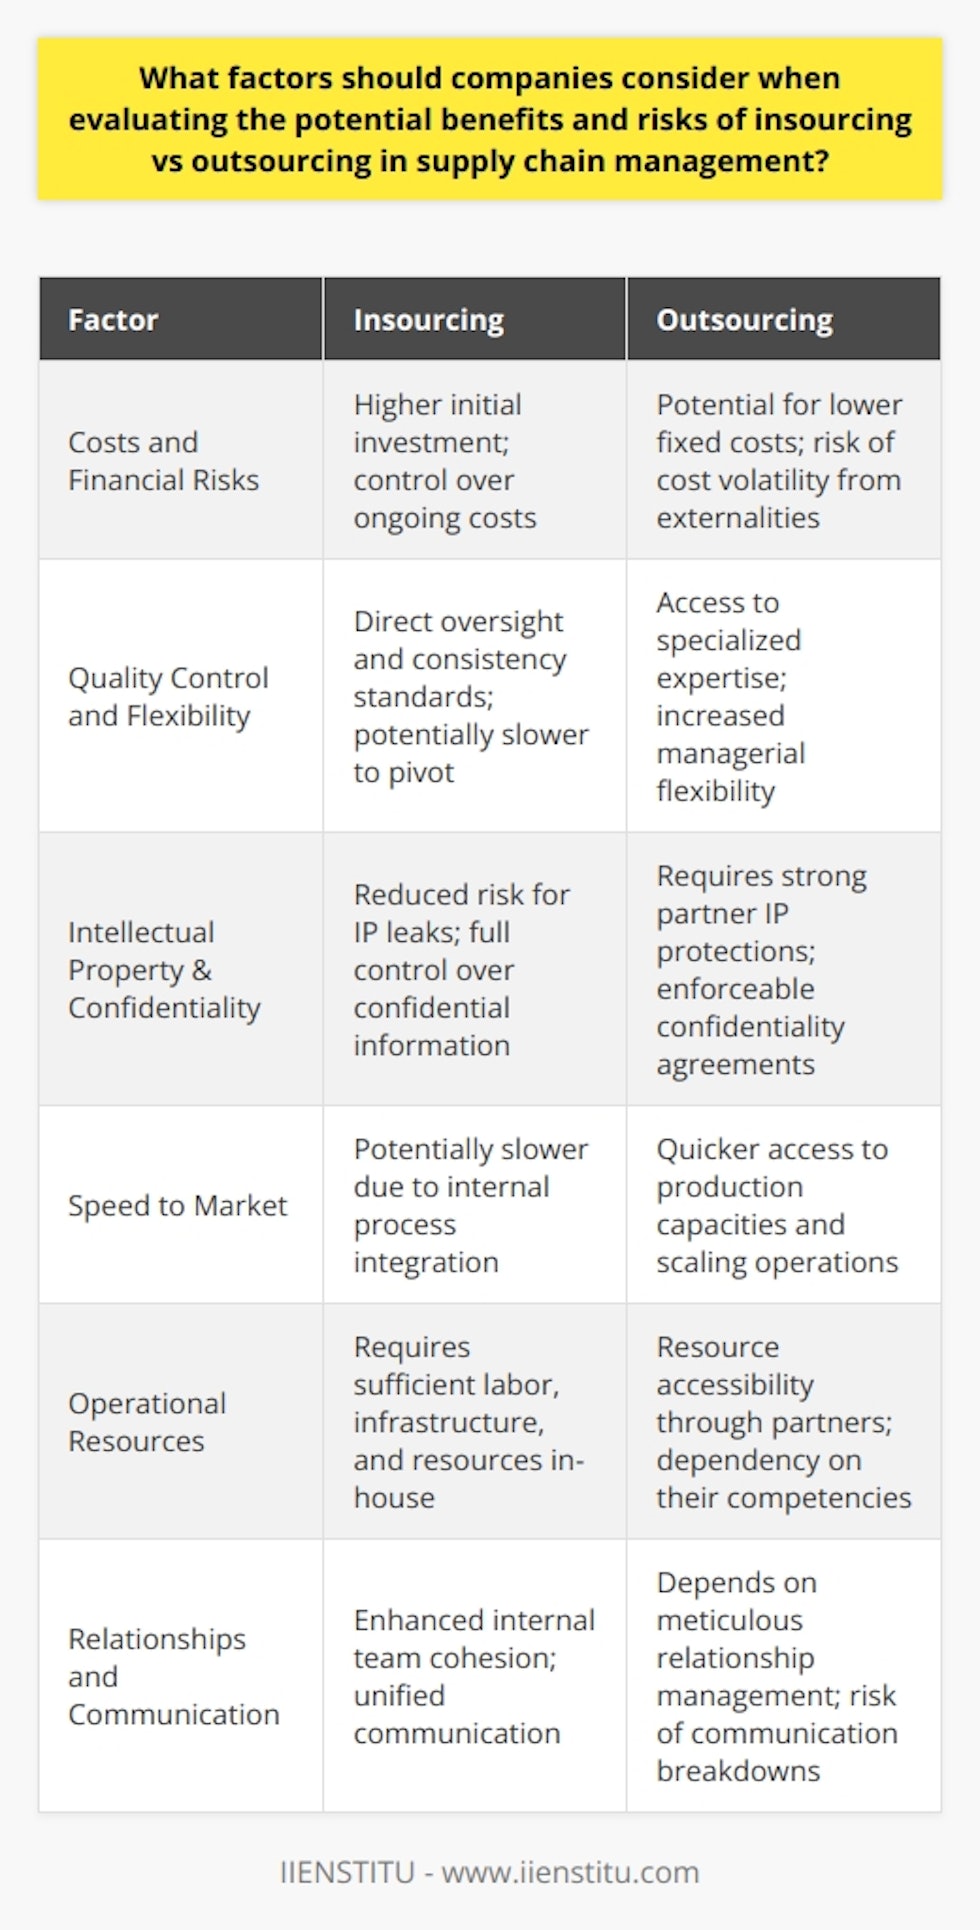 In the realm of supply chain management, the dichotomy between insourcing and outsourcing presents a complex decision matrix for companies. This choice is underpinned by a collection of factors that influence the potential benefits and risks associated with each approach.Costs and Financial RisksCost considerations extend beyond mere expenditure analysis. Financial risks are multidimensional, encompassing labor costs, cost of acquiring and maintaining equipment, and transportation overheads. Insourcing may entail higher initial capital investments, whereas outsourcing can theoretically minimize fixed costs. However, reliance on third-party providers may introduce volatility into budget forecasting due to potential external cost escalations, such as increased service fees or international trade tariffs. Therefore, a comprehensive financial analysis should include both upfront and ongoing costs, alongside the agility to mitigate unforeseen financial risks.Quality Control and FlexibilityThe sphere of quality control stands as a pivotal facet of the insourcing and outsourcing debate. Whilst insourcing bequeaths companies with direct oversight over processes and outcomes, it requires a robust internal system to consistently uphold standards. Conversely, outsourcing can leverage specialized expertise from providers, although it may dilute direct control. Flexibility, in terms of both production and managerial decisions, often favors outsourcing, given the reduced need for internal resource reallocation. Nonetheless, insourcing can offer a more stable pivot for innovation and adjustments without the need to renegotiate contracts or adapt to vendors' limitations.Intellectual Property and ConfidentialityThe safeguarding of intellectual property (IP) and confidentiality is paramount. Insourcing naturally minimizes the risk of IP leaks or data breaches, as all aspects of development and distribution are contained within corporate boundaries. However, when outsourcing is the preferred route, it is critical to secure partnerships with entities that offer a strong track record of IP protection, supported by enforceable agreements to ensure confidentiality and compliance with relevant regulations.Speed to MarketIn a fast-paced commercial landscape, the velocity at which a company can introduce products may tip the scale between insourcing and outsourcing. Outsourcing can provide swift access to existing capacities and expedite scaling operations to meet market demand. Insourcing, while potentially slower to mobilize, affords companies the advantage of tightly integrated processes, potentially shortening the time from concept to customer.Operational ResourcesThe availability and accessibility of operational resources are also key determinants. Does the company have a skilled labor force, infrastructure, and material resources required for insourcing? If not, can these be more effectively sourced through outsourcing partners? This requires a strategic review of internal competencies versus the capabilities and performance histories of potential suppliers.Relationships and CommunicationFinally, the dynamics of relationships and communication processes are significant. Insourcing fosters an environment of internal team building and unified communication channels. Outsourcing, while offering access to specialized skills and broader industry insights, necessitates investment in relationship management and potential exposure to communication breakdowns due to geographical or organizational barriers.Each of these factors must be carefully weighed by companies in the context of their strategic, operational, and financial goals. While insourcing and outsourcing each present distinct opportunities and challenges, the decision between the two must be grounded in a thorough evaluation of the company’s long-term vision and immediate operational needs.